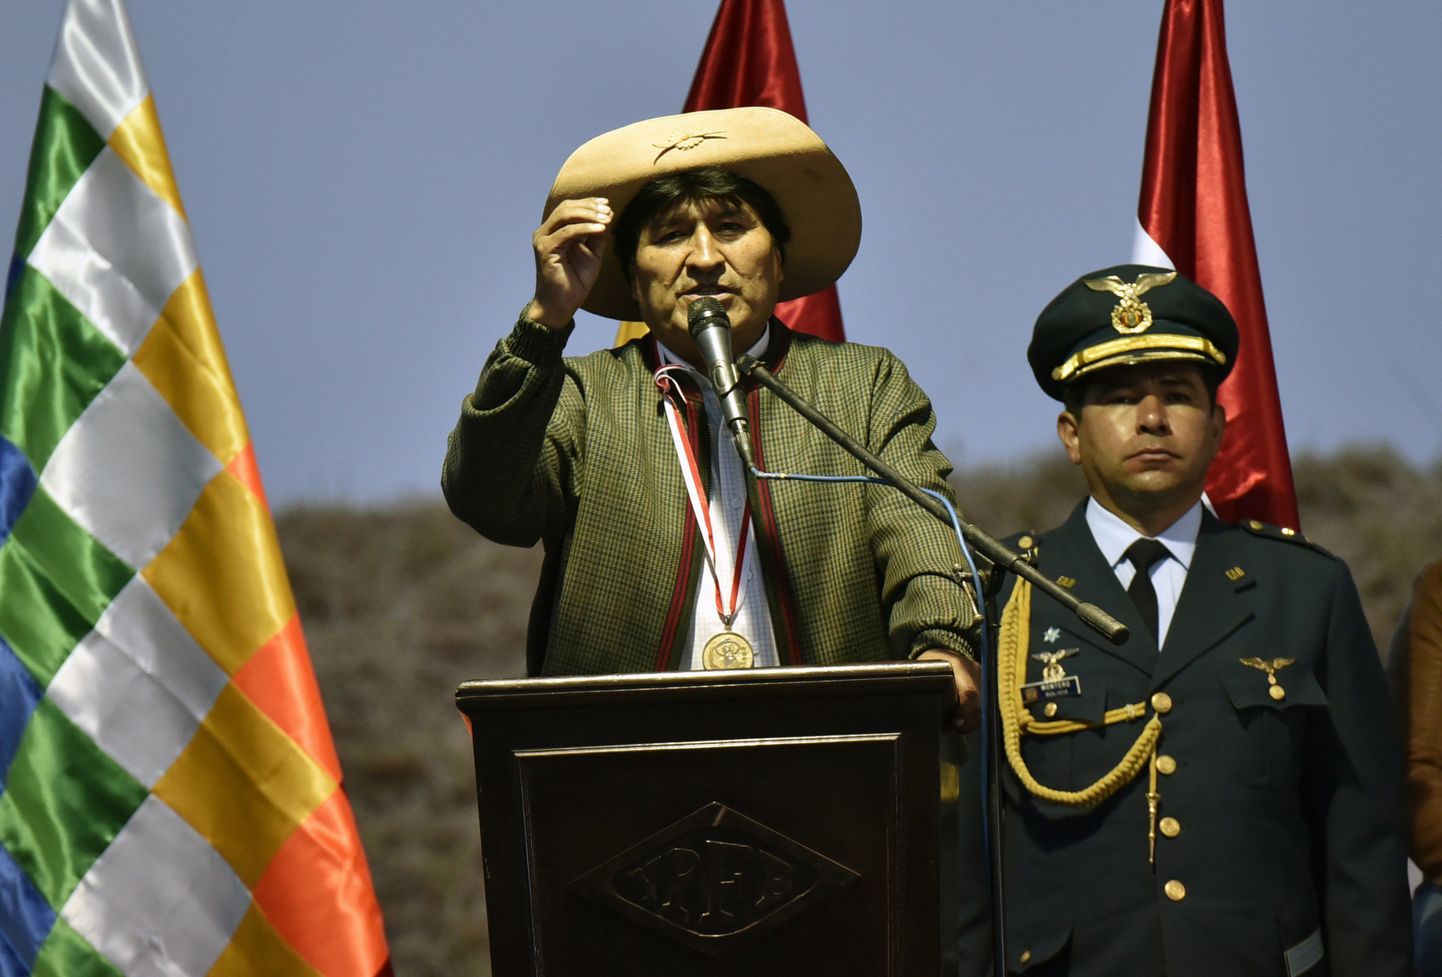 Bolivian President Evo Morales Ayma delivers a speech during the inauguration of a plant which separates liquid from gas in Yacuiba, Bolivia, on August 24, 2015. The plant will provide gas to Paraguay and Peru.  AFP PHOTO / Aizar Raldes